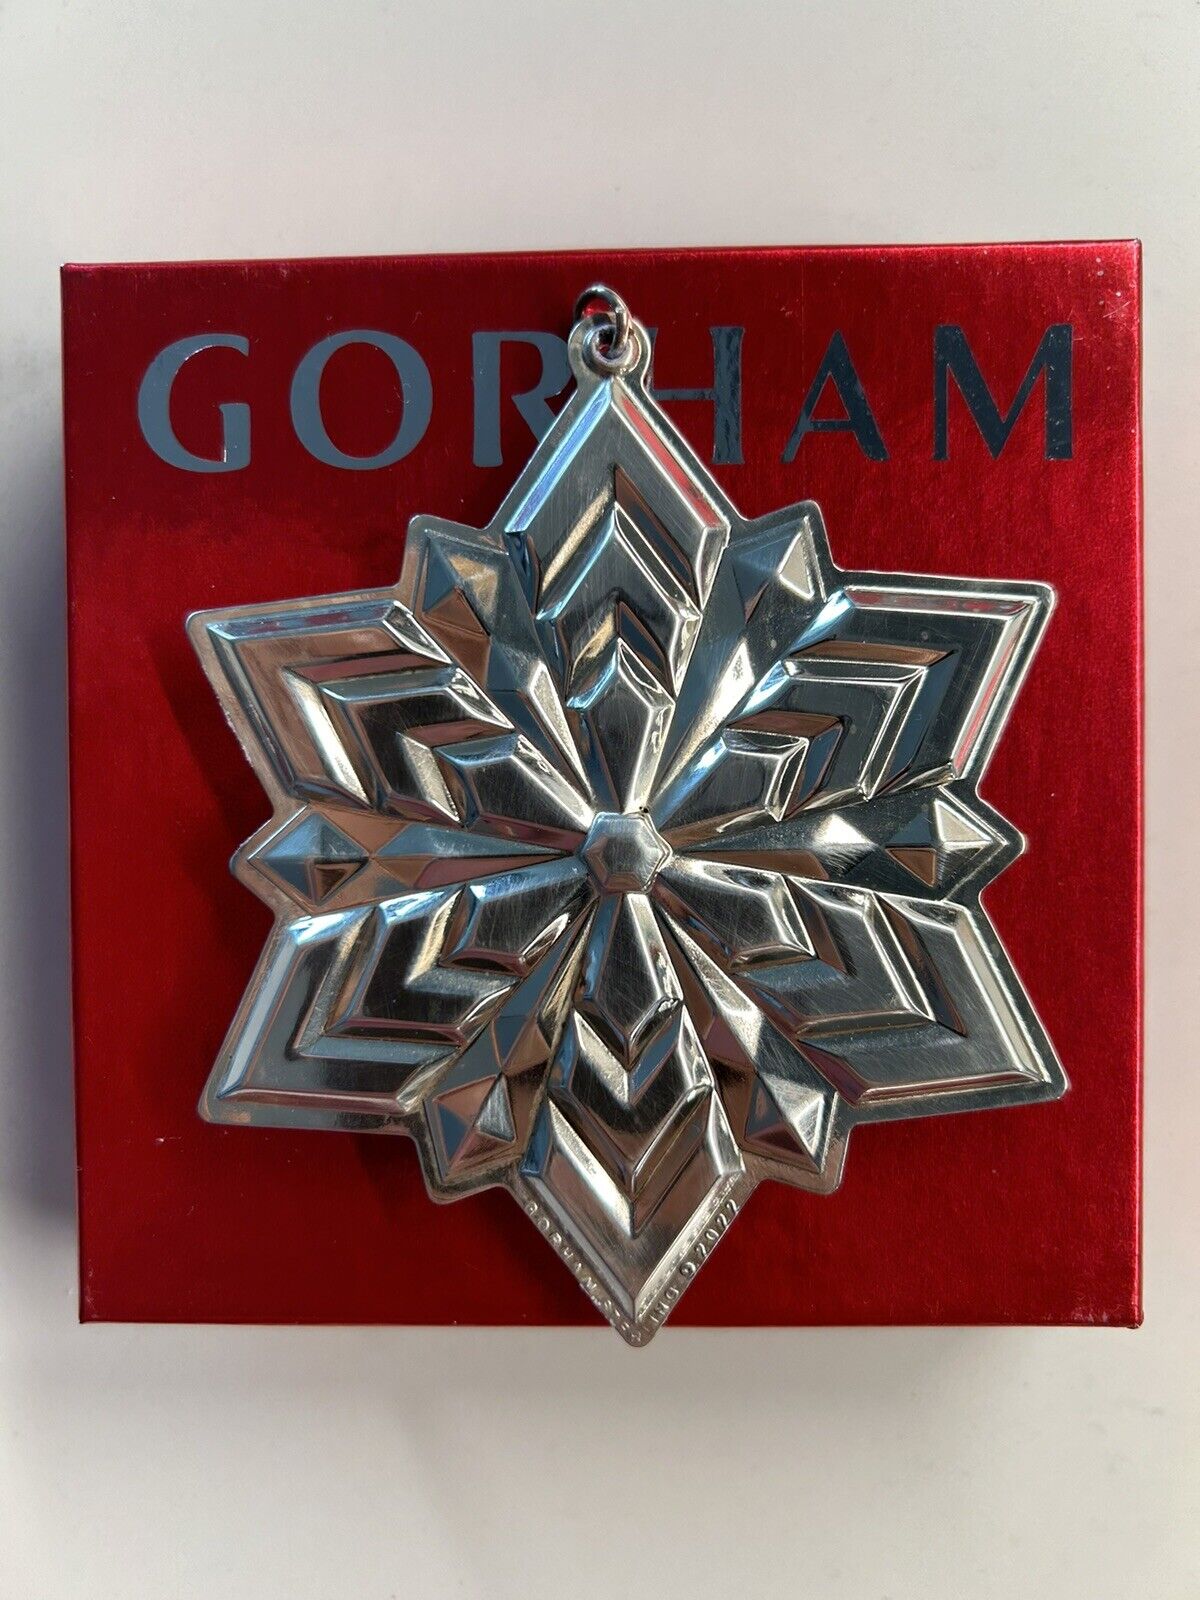 2022 Gorham STERLING Silver 53rd Annual Edition Snowflake Ornament